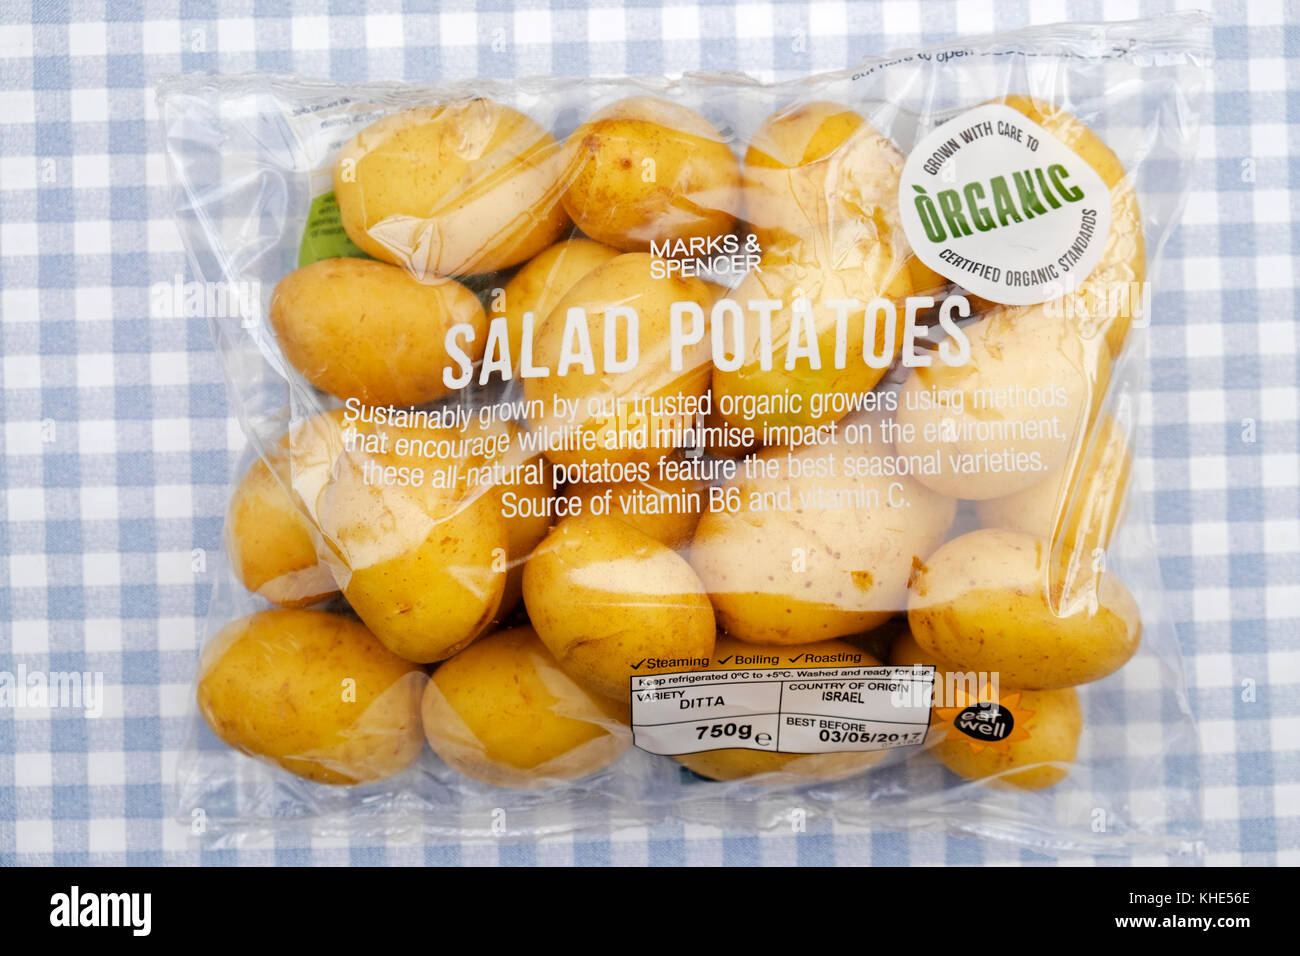 M&S organic salad potatoes imported from Israel Stock Photo